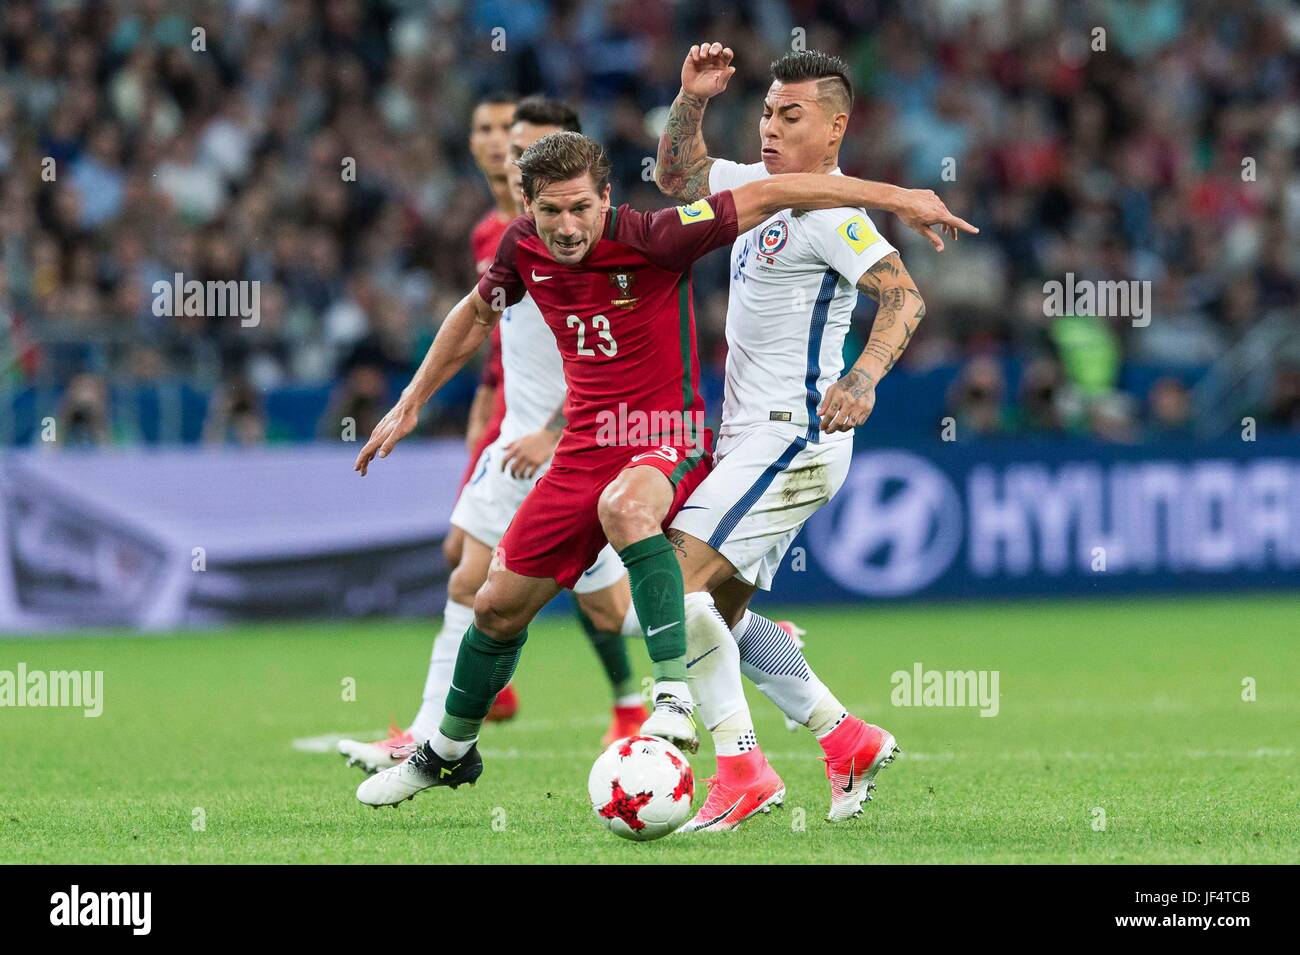 Kazan, Russia. 28th June, 2017. Andrien Silva (L) of Portugal vies for the ball with Eduardo Vargas of Chile during the FIFA Confederations Cup 2017 semifinal match in Kazan, Russia, June 28, 2017. Credit: Evgeny Sinitsyn/Xinhua/Alamy Live News Stock Photo